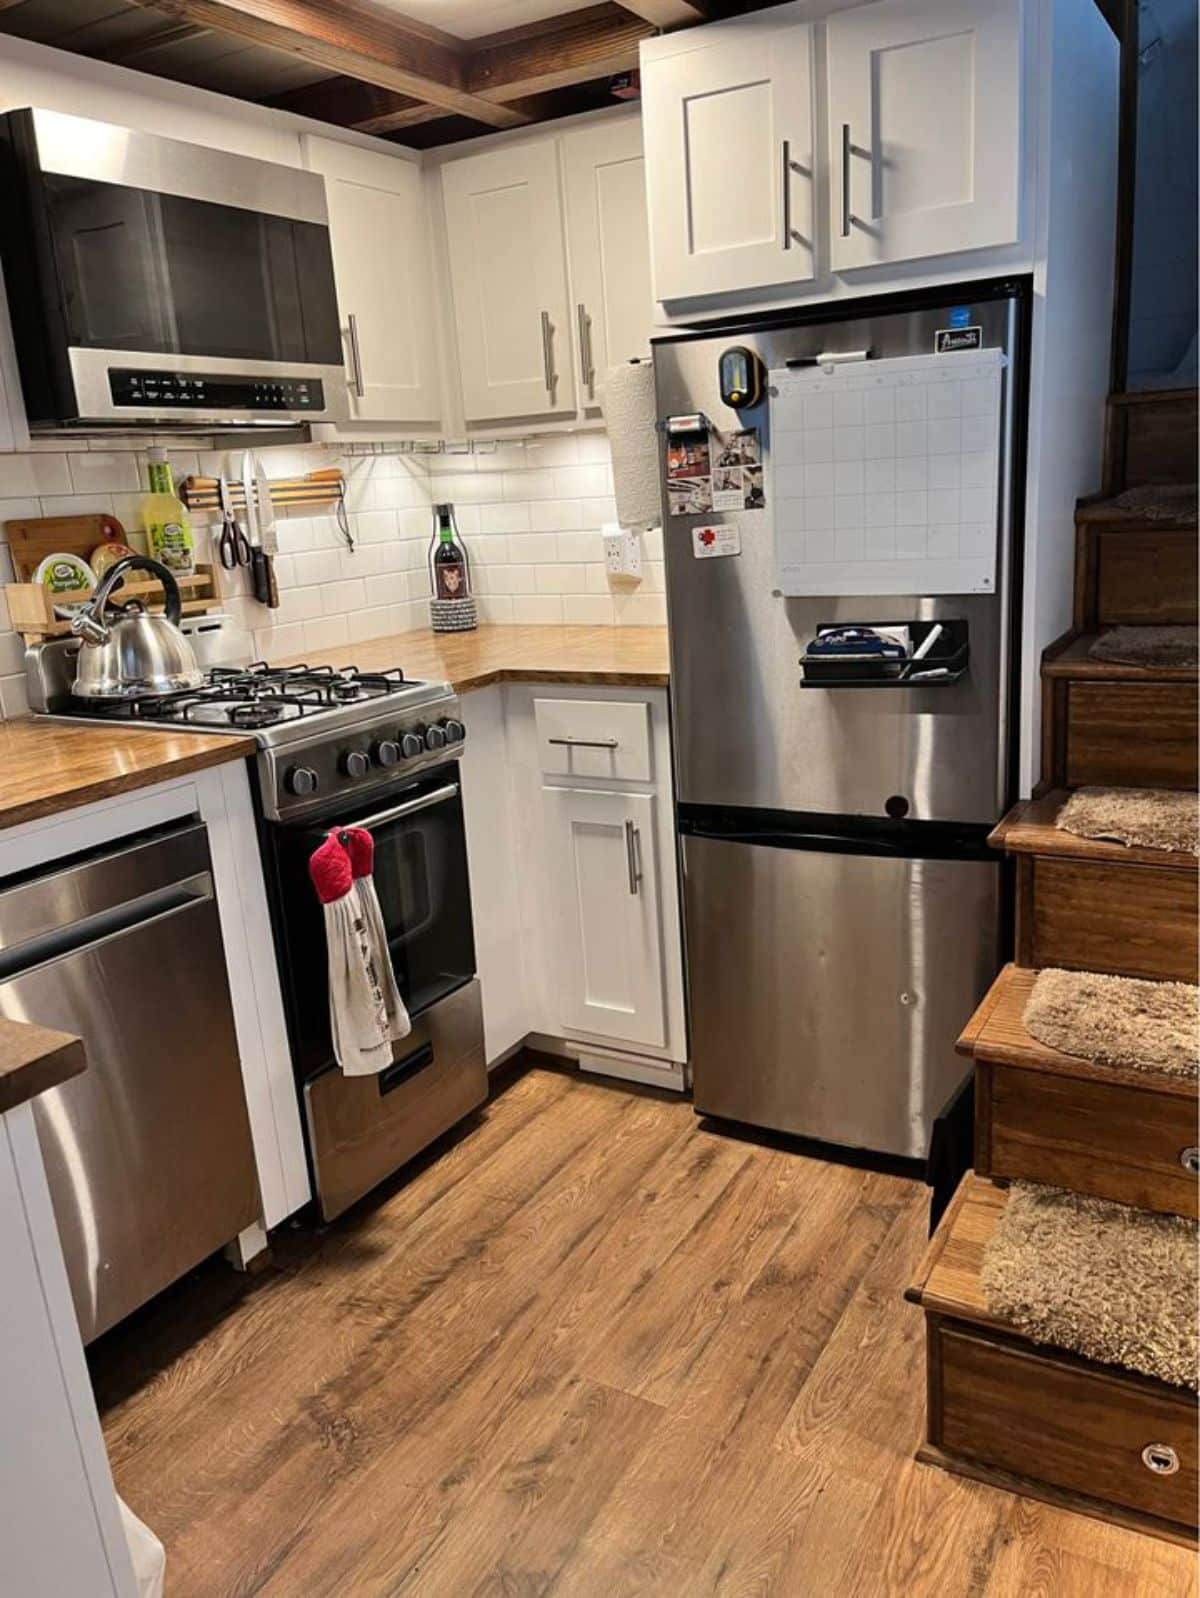 necessary appliances present in the kitchen of 30’ tiny house